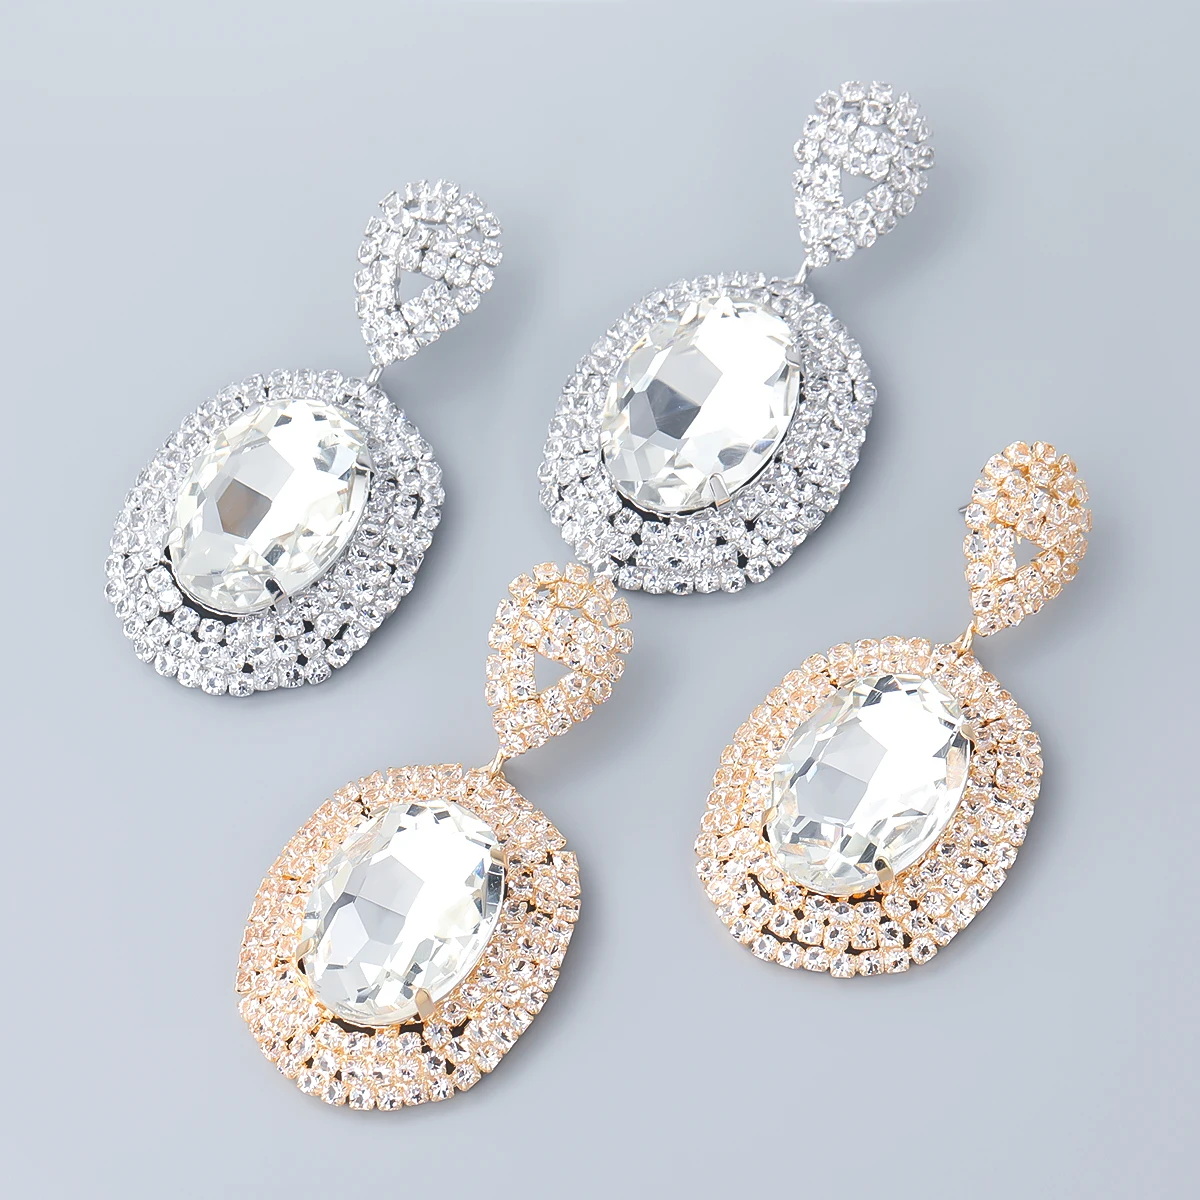 

JIJIAWENHUA New Trend Sparkling Big Rhinestone Oval women's Earrings Dinner Party Fashion Statement Jewelry Accessories